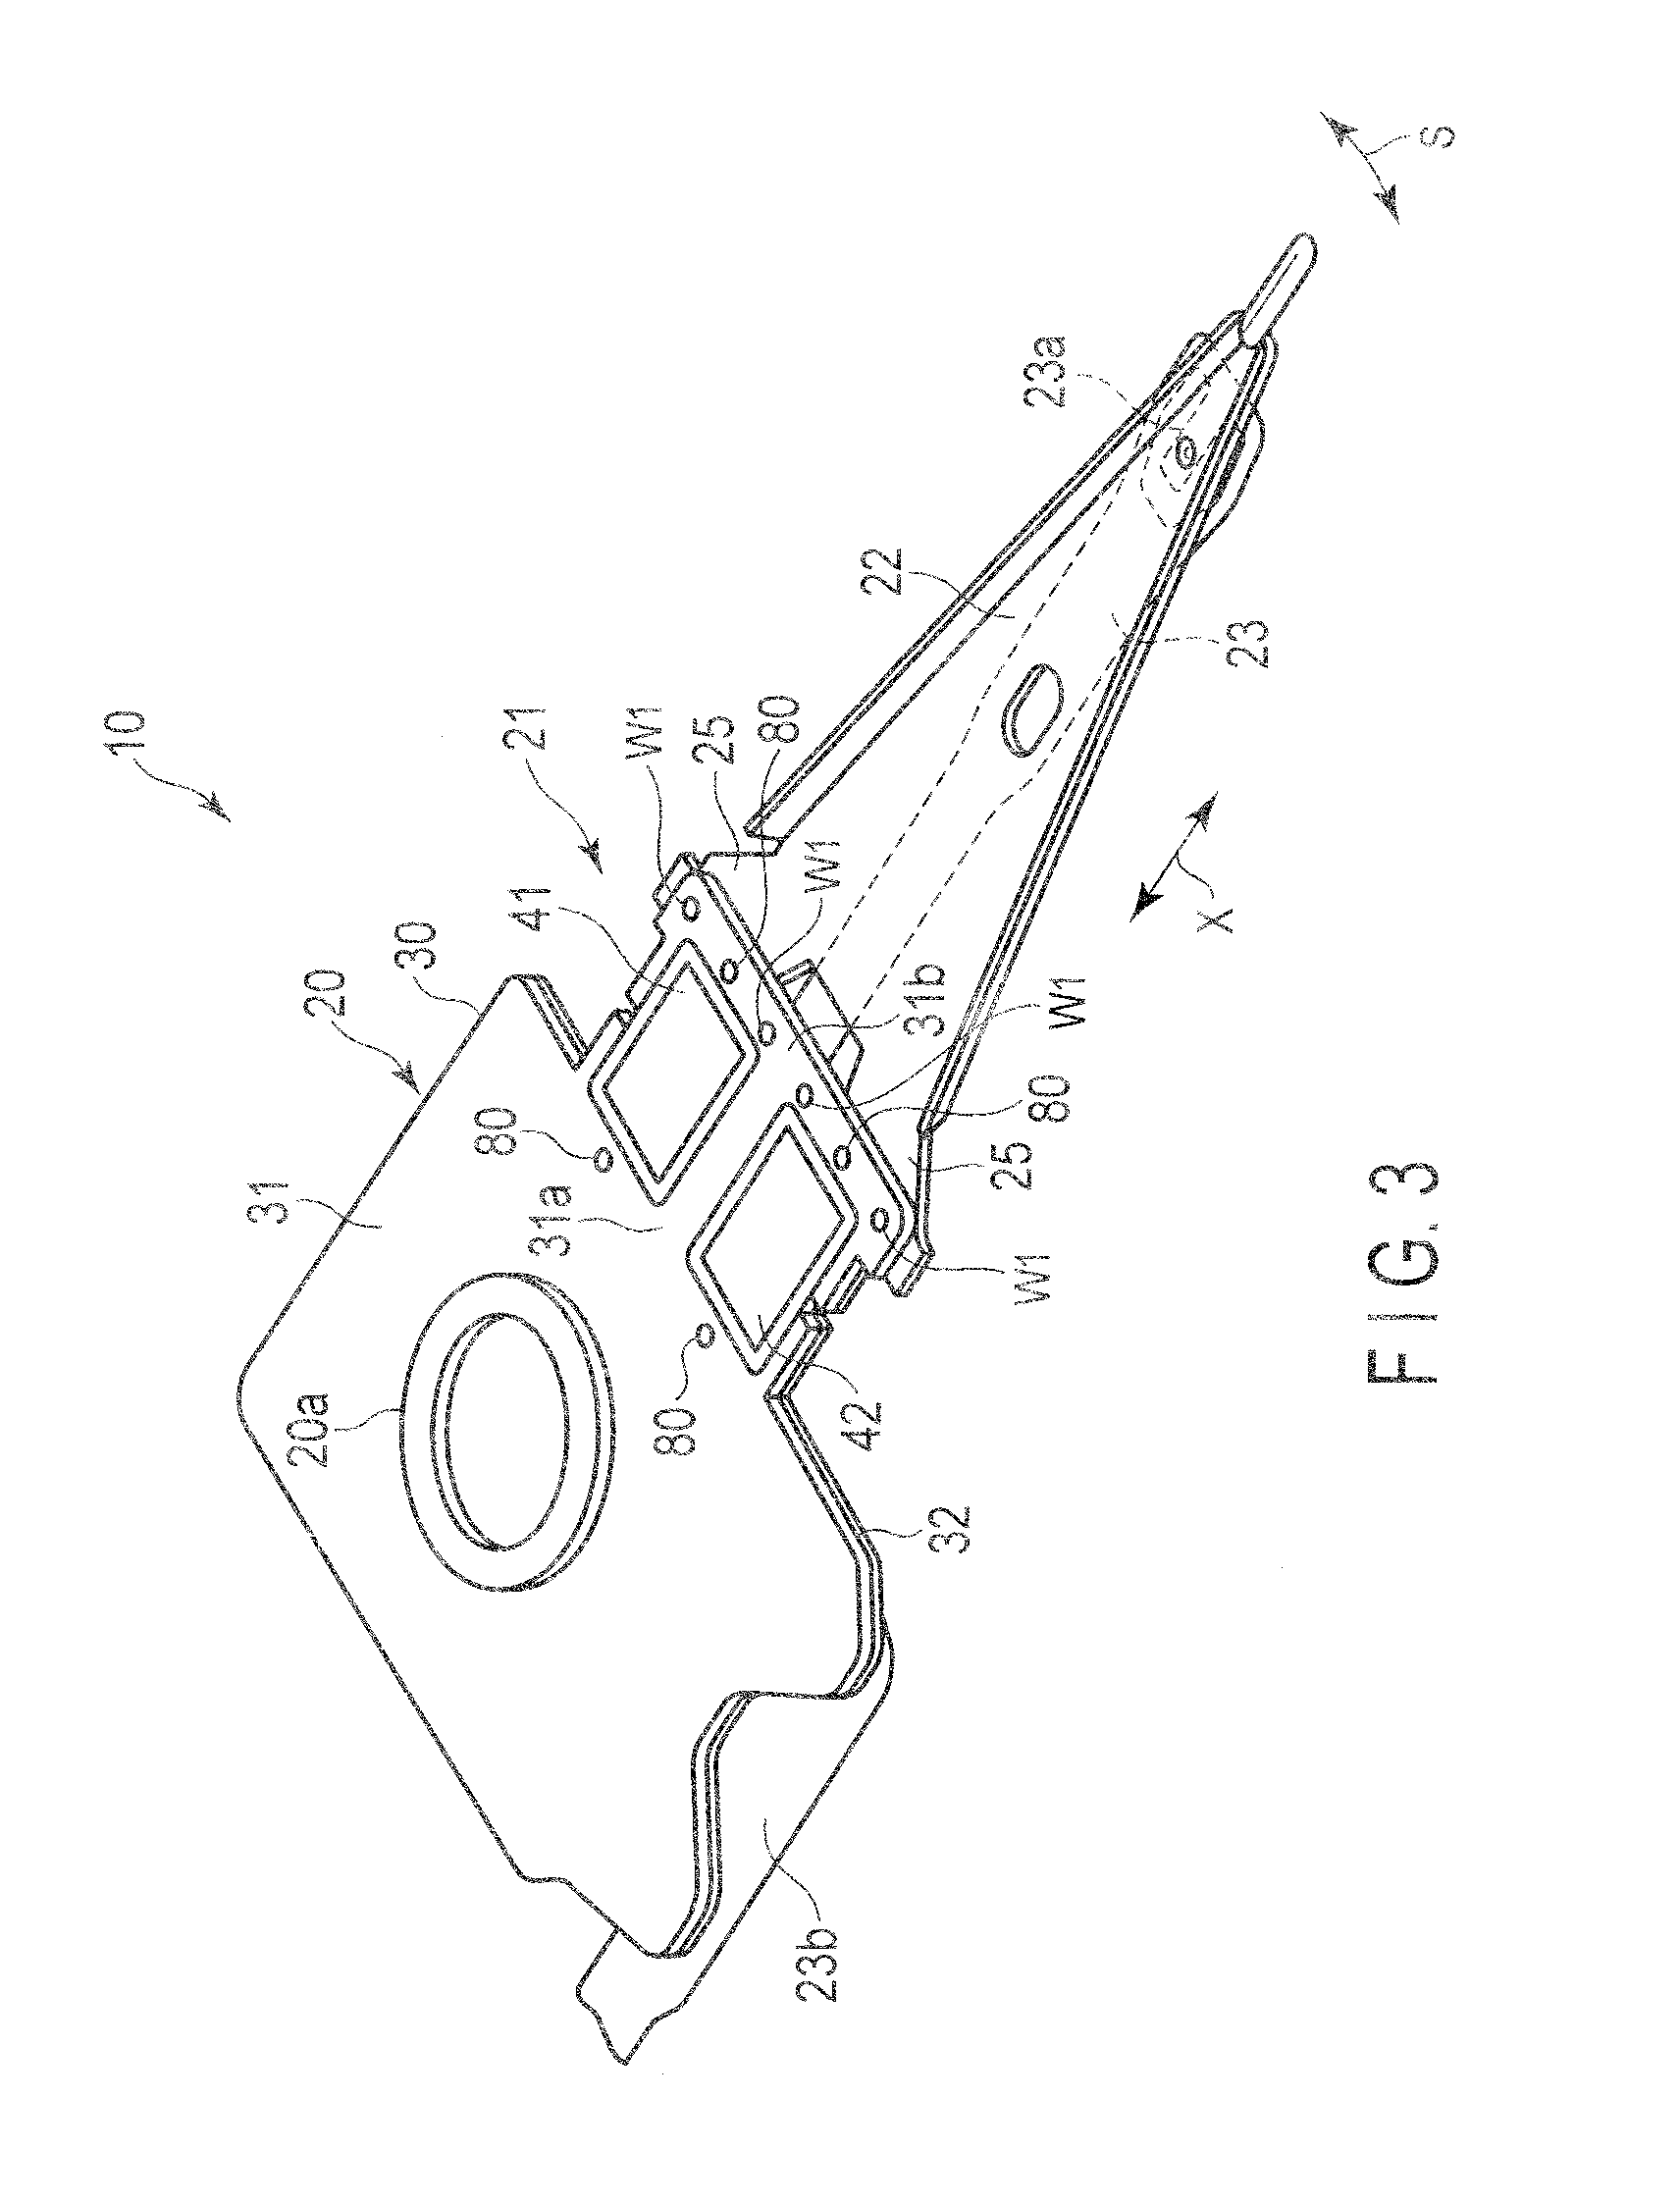 Disk drive suspension and manufacturing method therefor